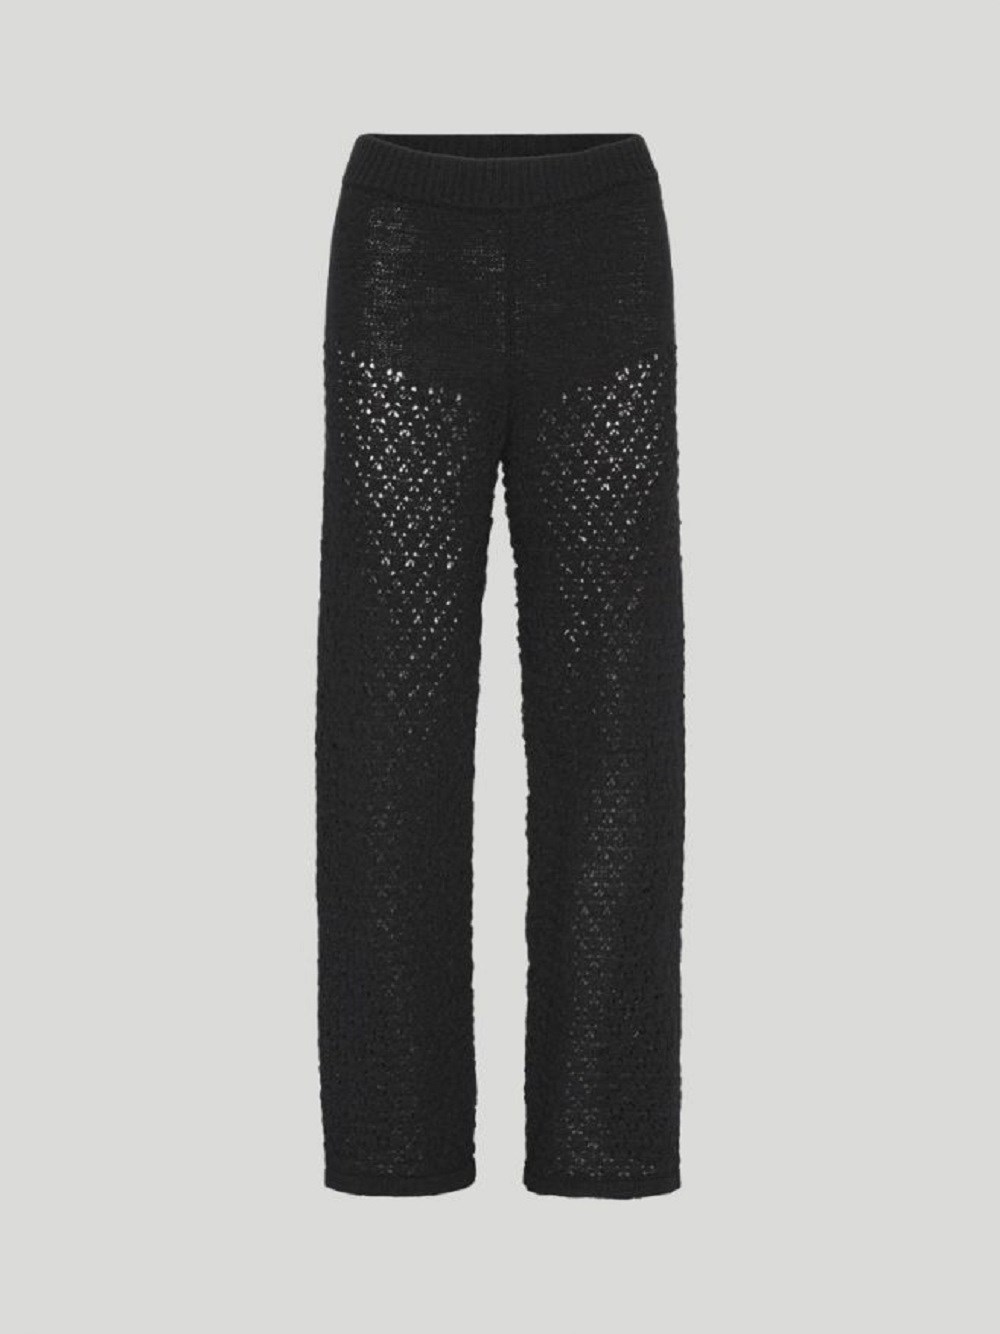 ROTATE BIRGER CHRISTENSEN STRUCTURED KNIT TAPERED trousers